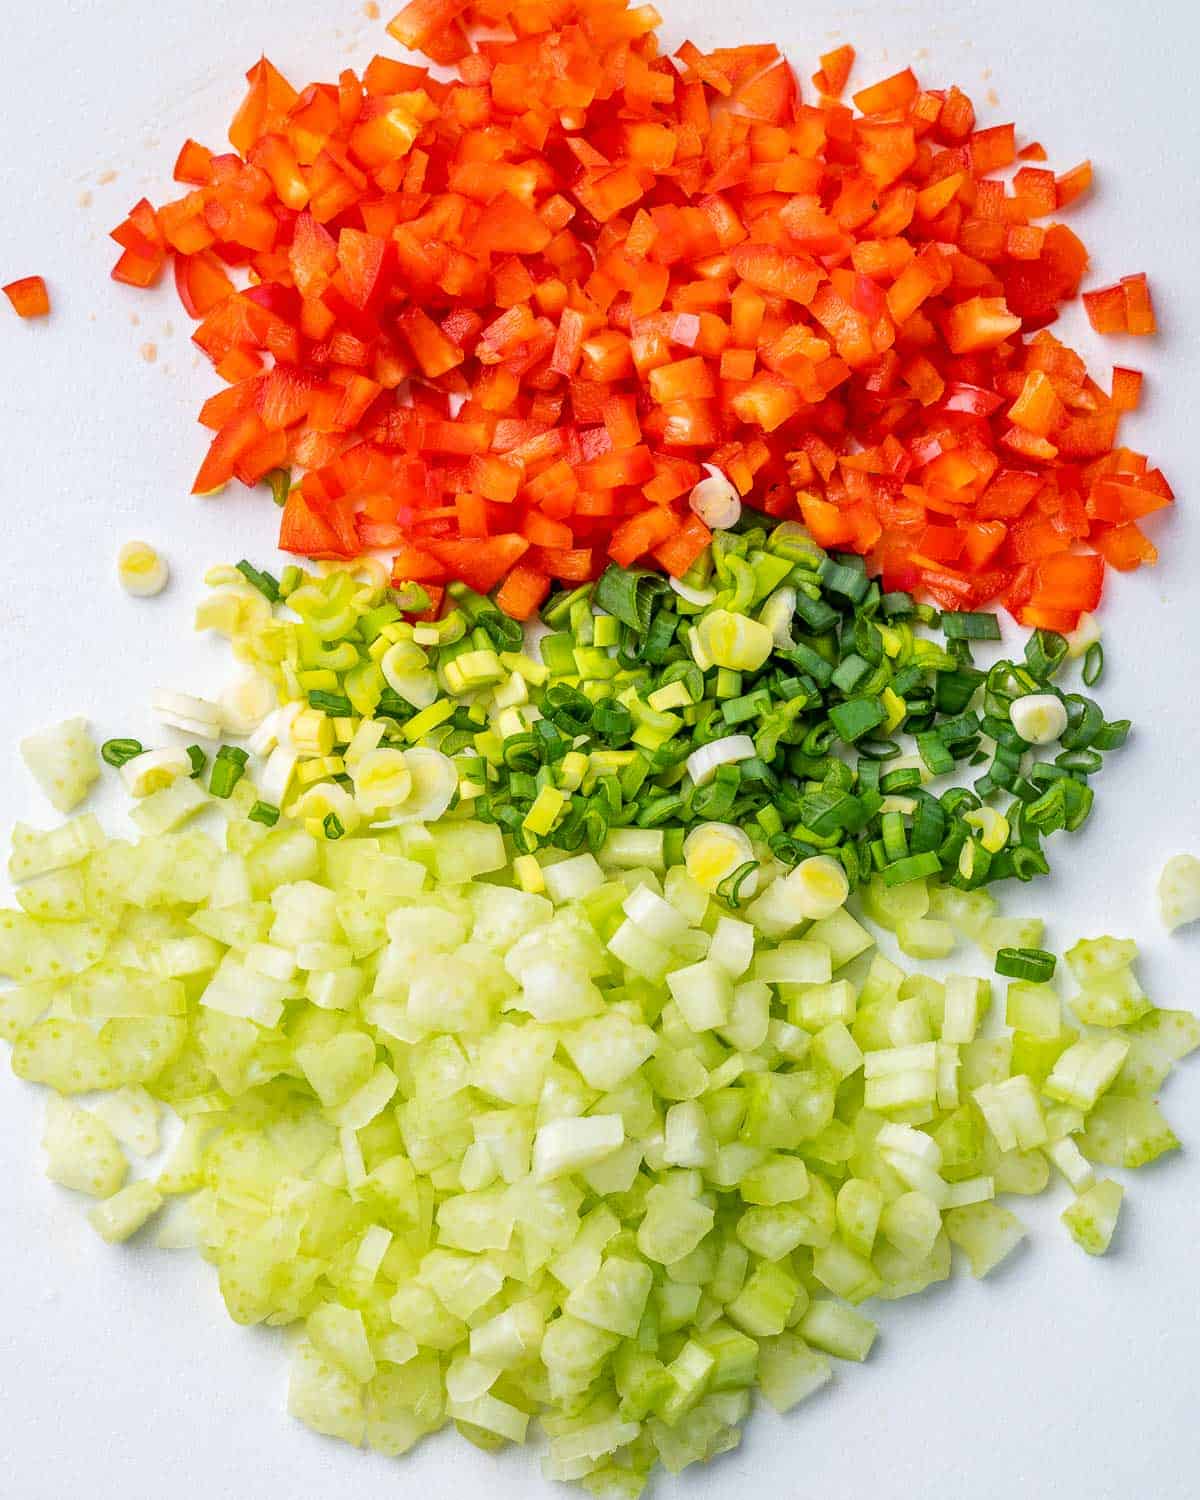 Diced celery, bell pepper, and green onions on cutting board.